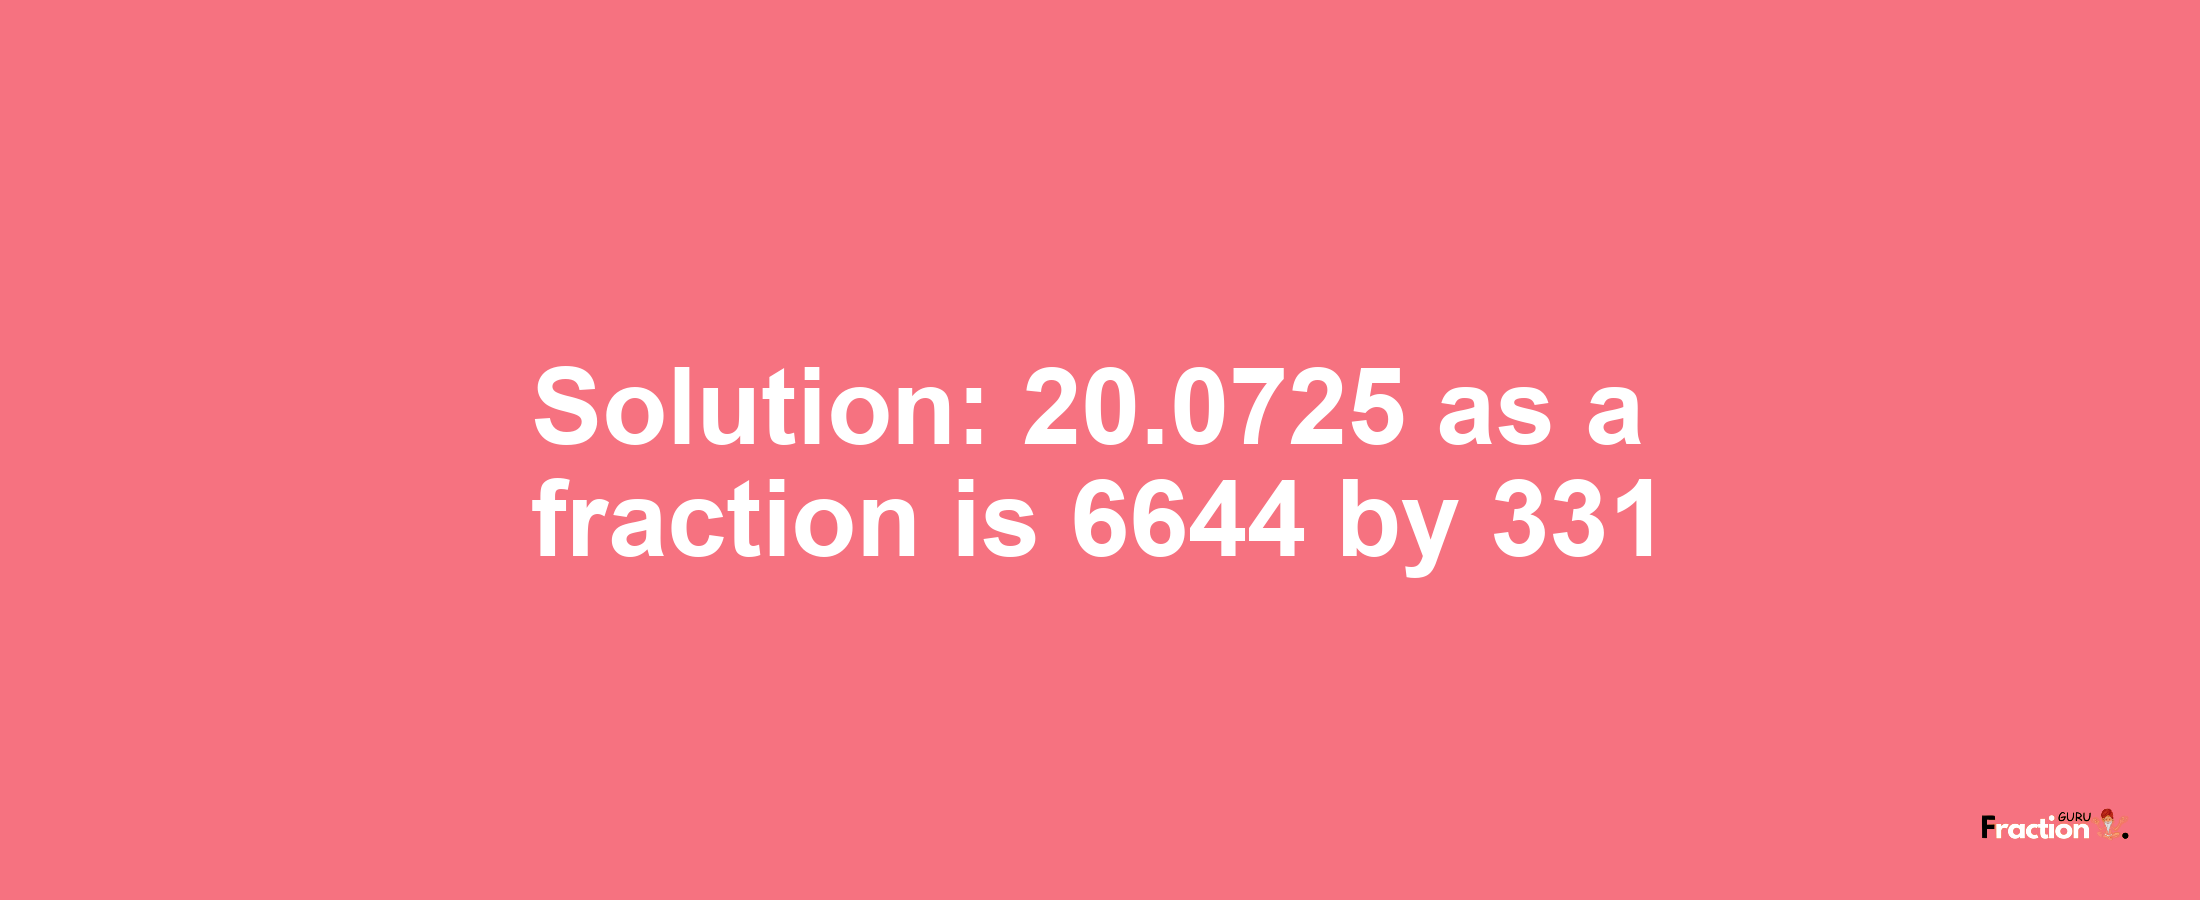 Solution:20.0725 as a fraction is 6644/331